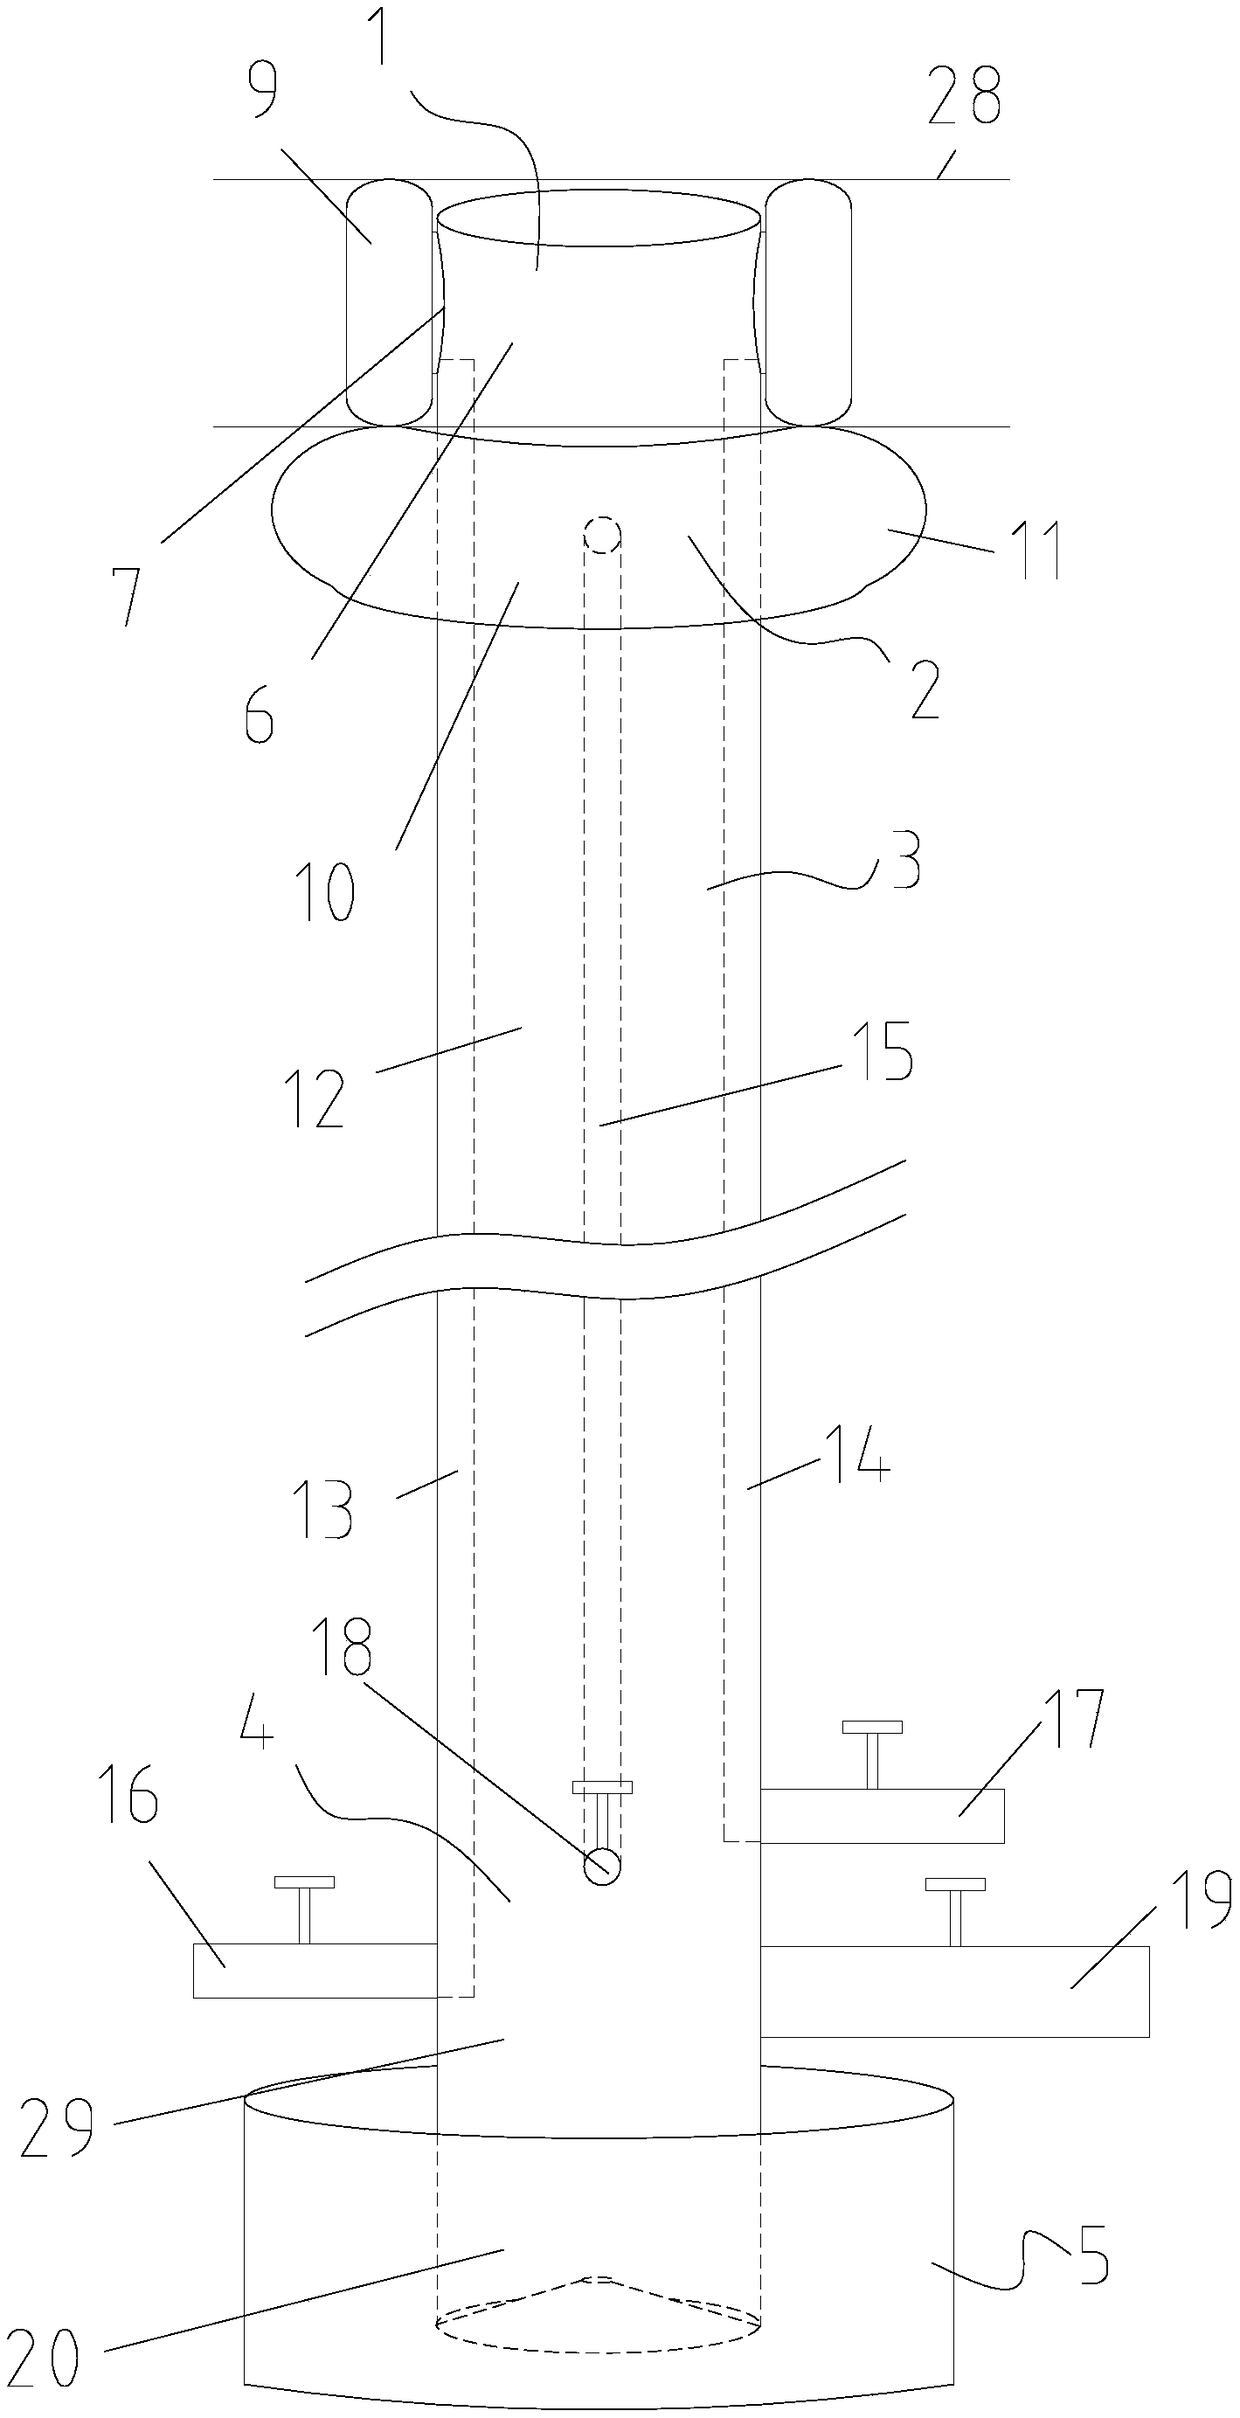 Common bile duct probing sheathing tube with annular balloons